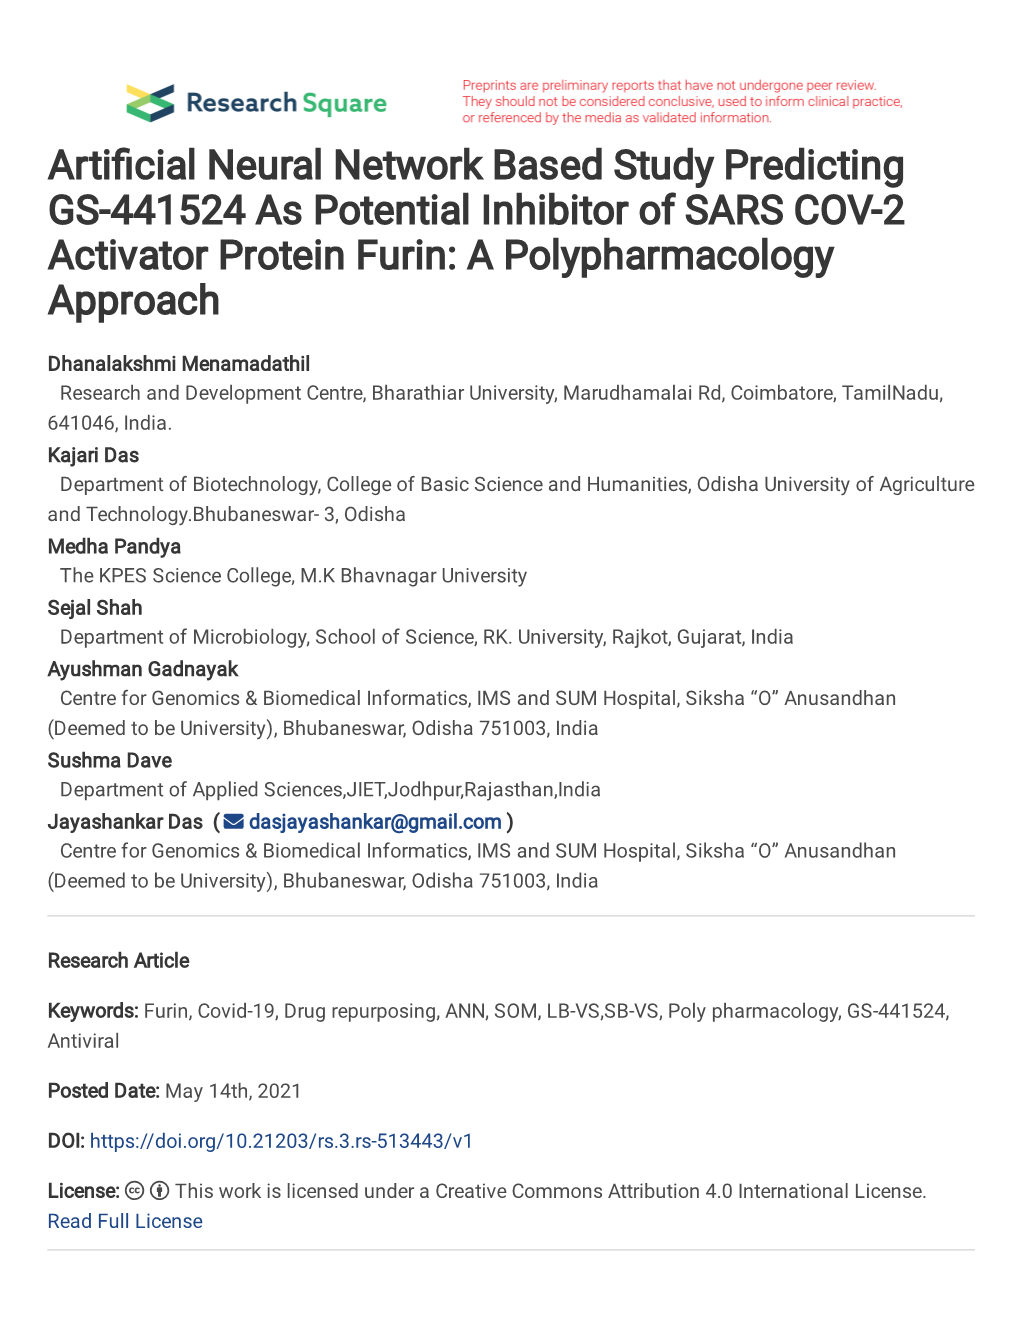 Arti Cial Neural Network Based Study Predicting GS-441524 As Potential Inhibitor of SARS COV-2 Activator Protein Furin